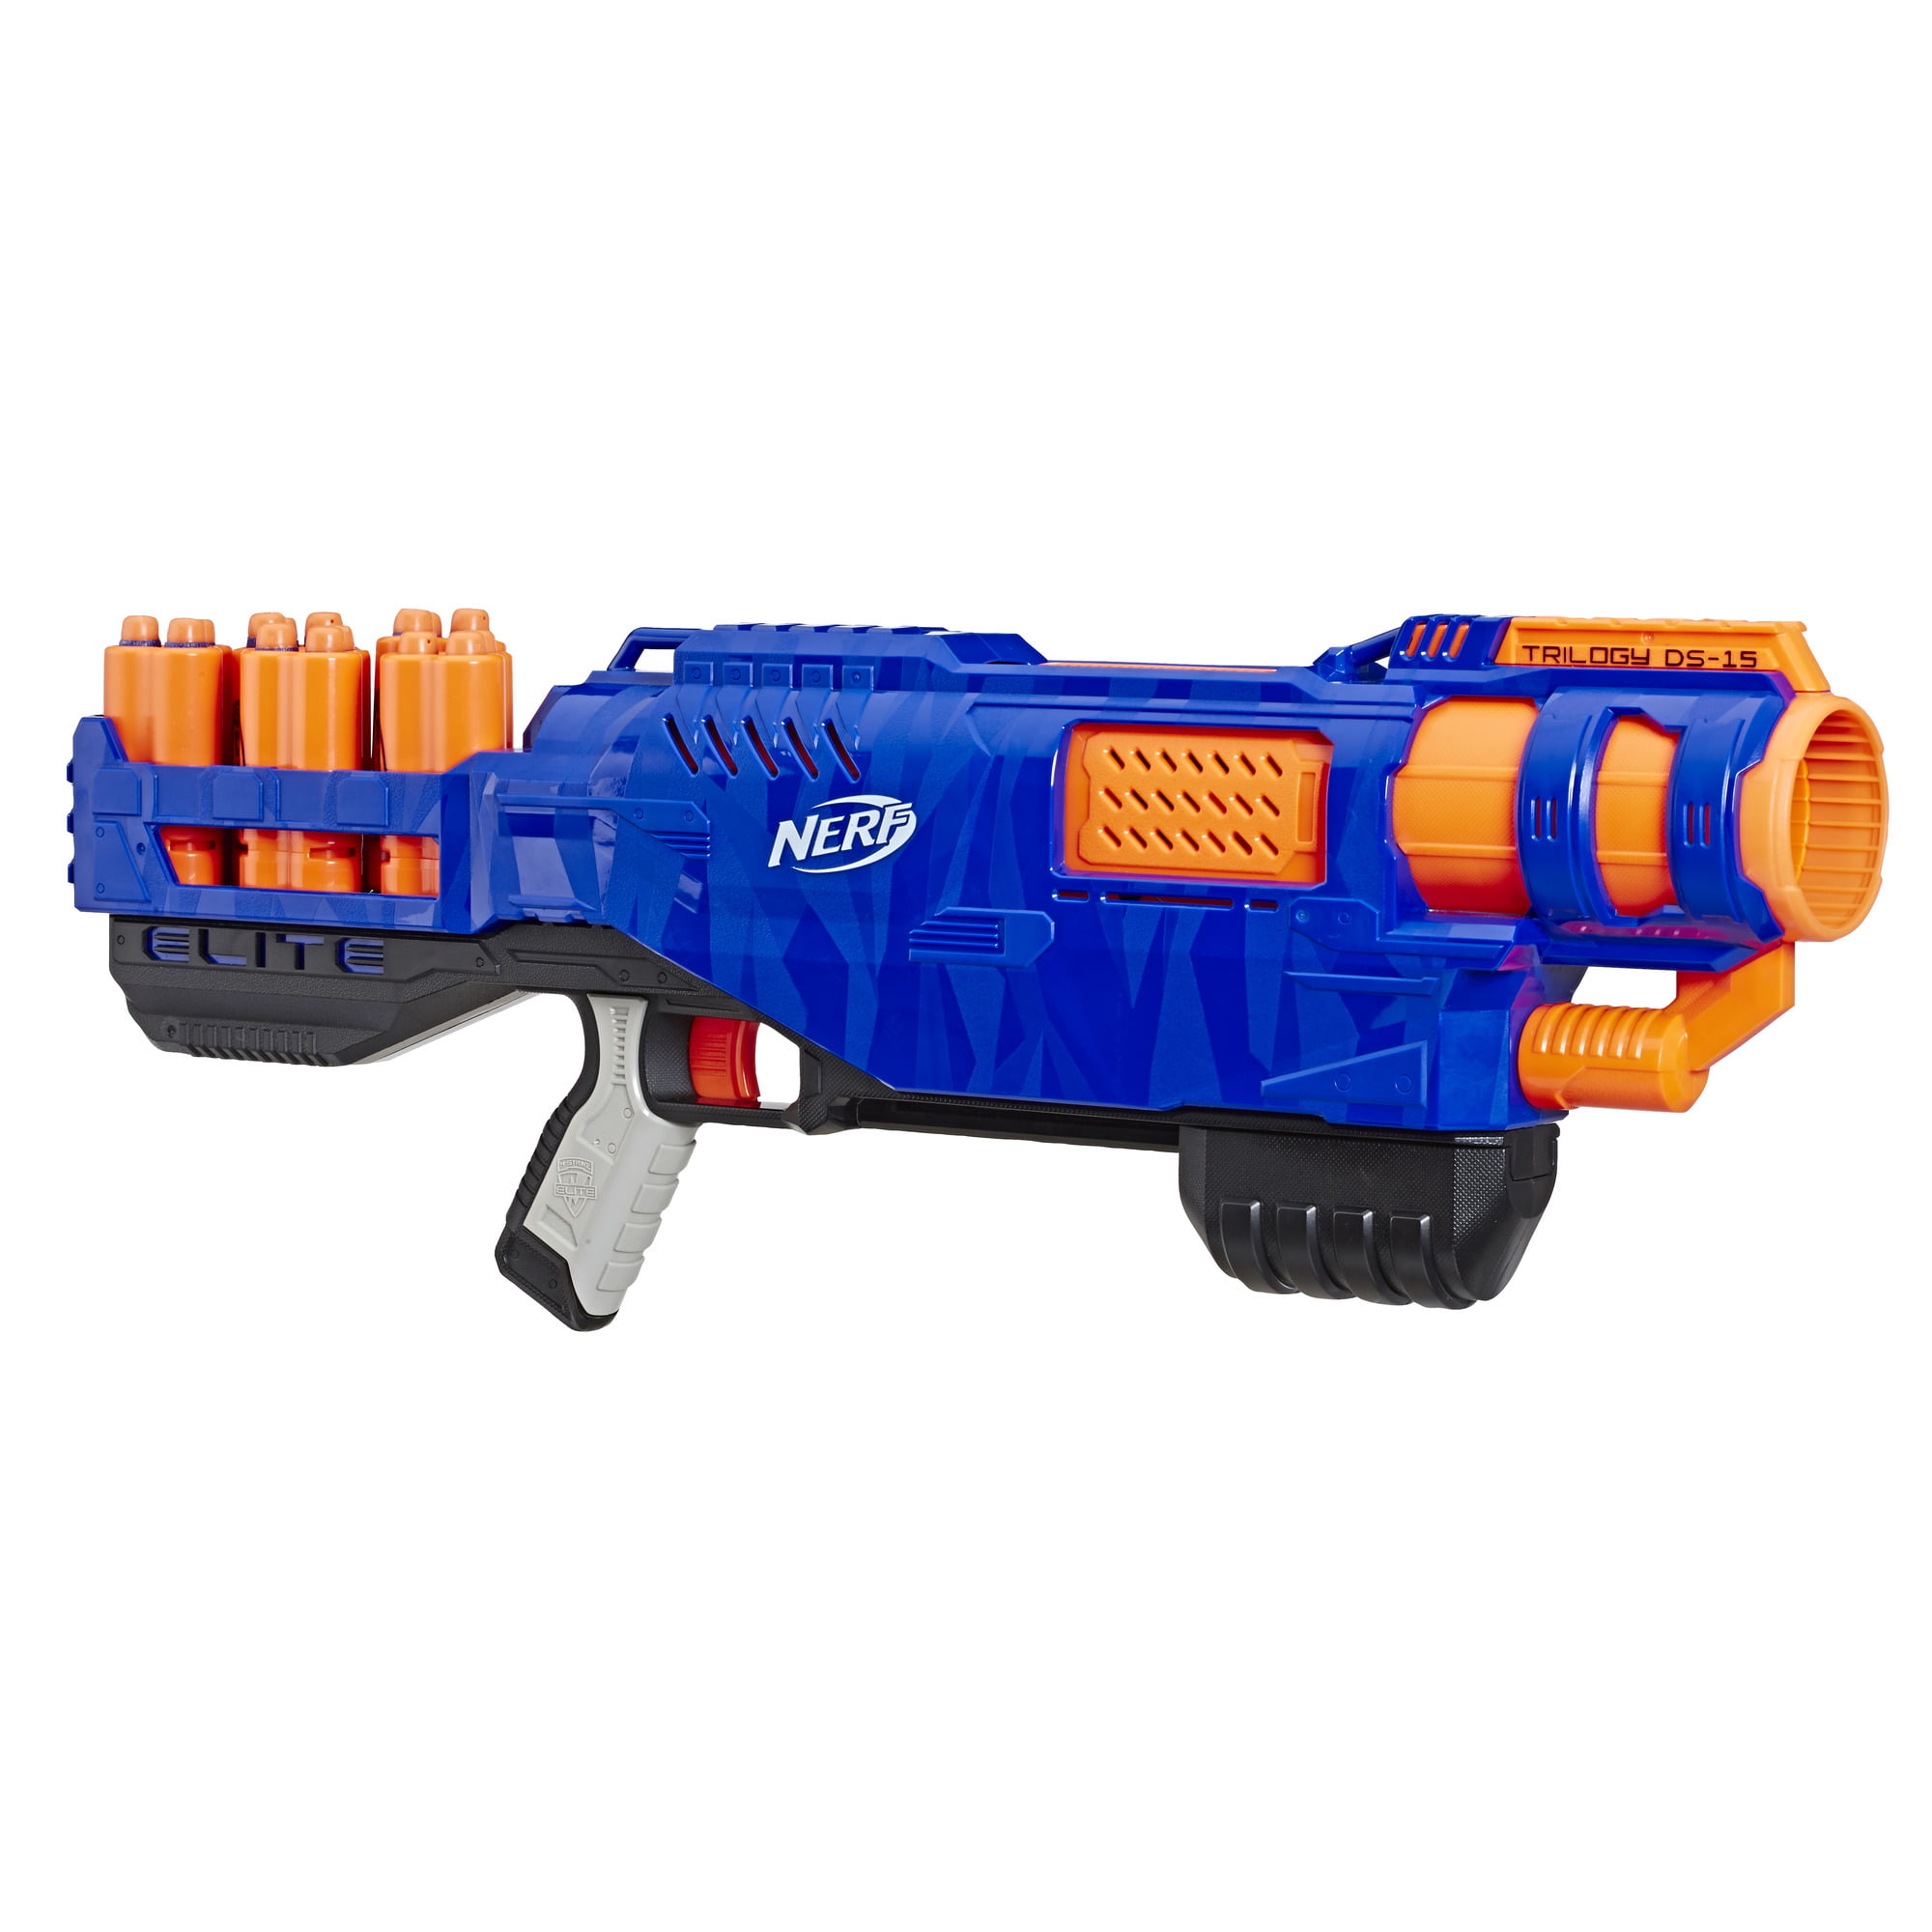 SHORT VERSION NERF ELECTRIC TOY GUN with toy target and toy bullets